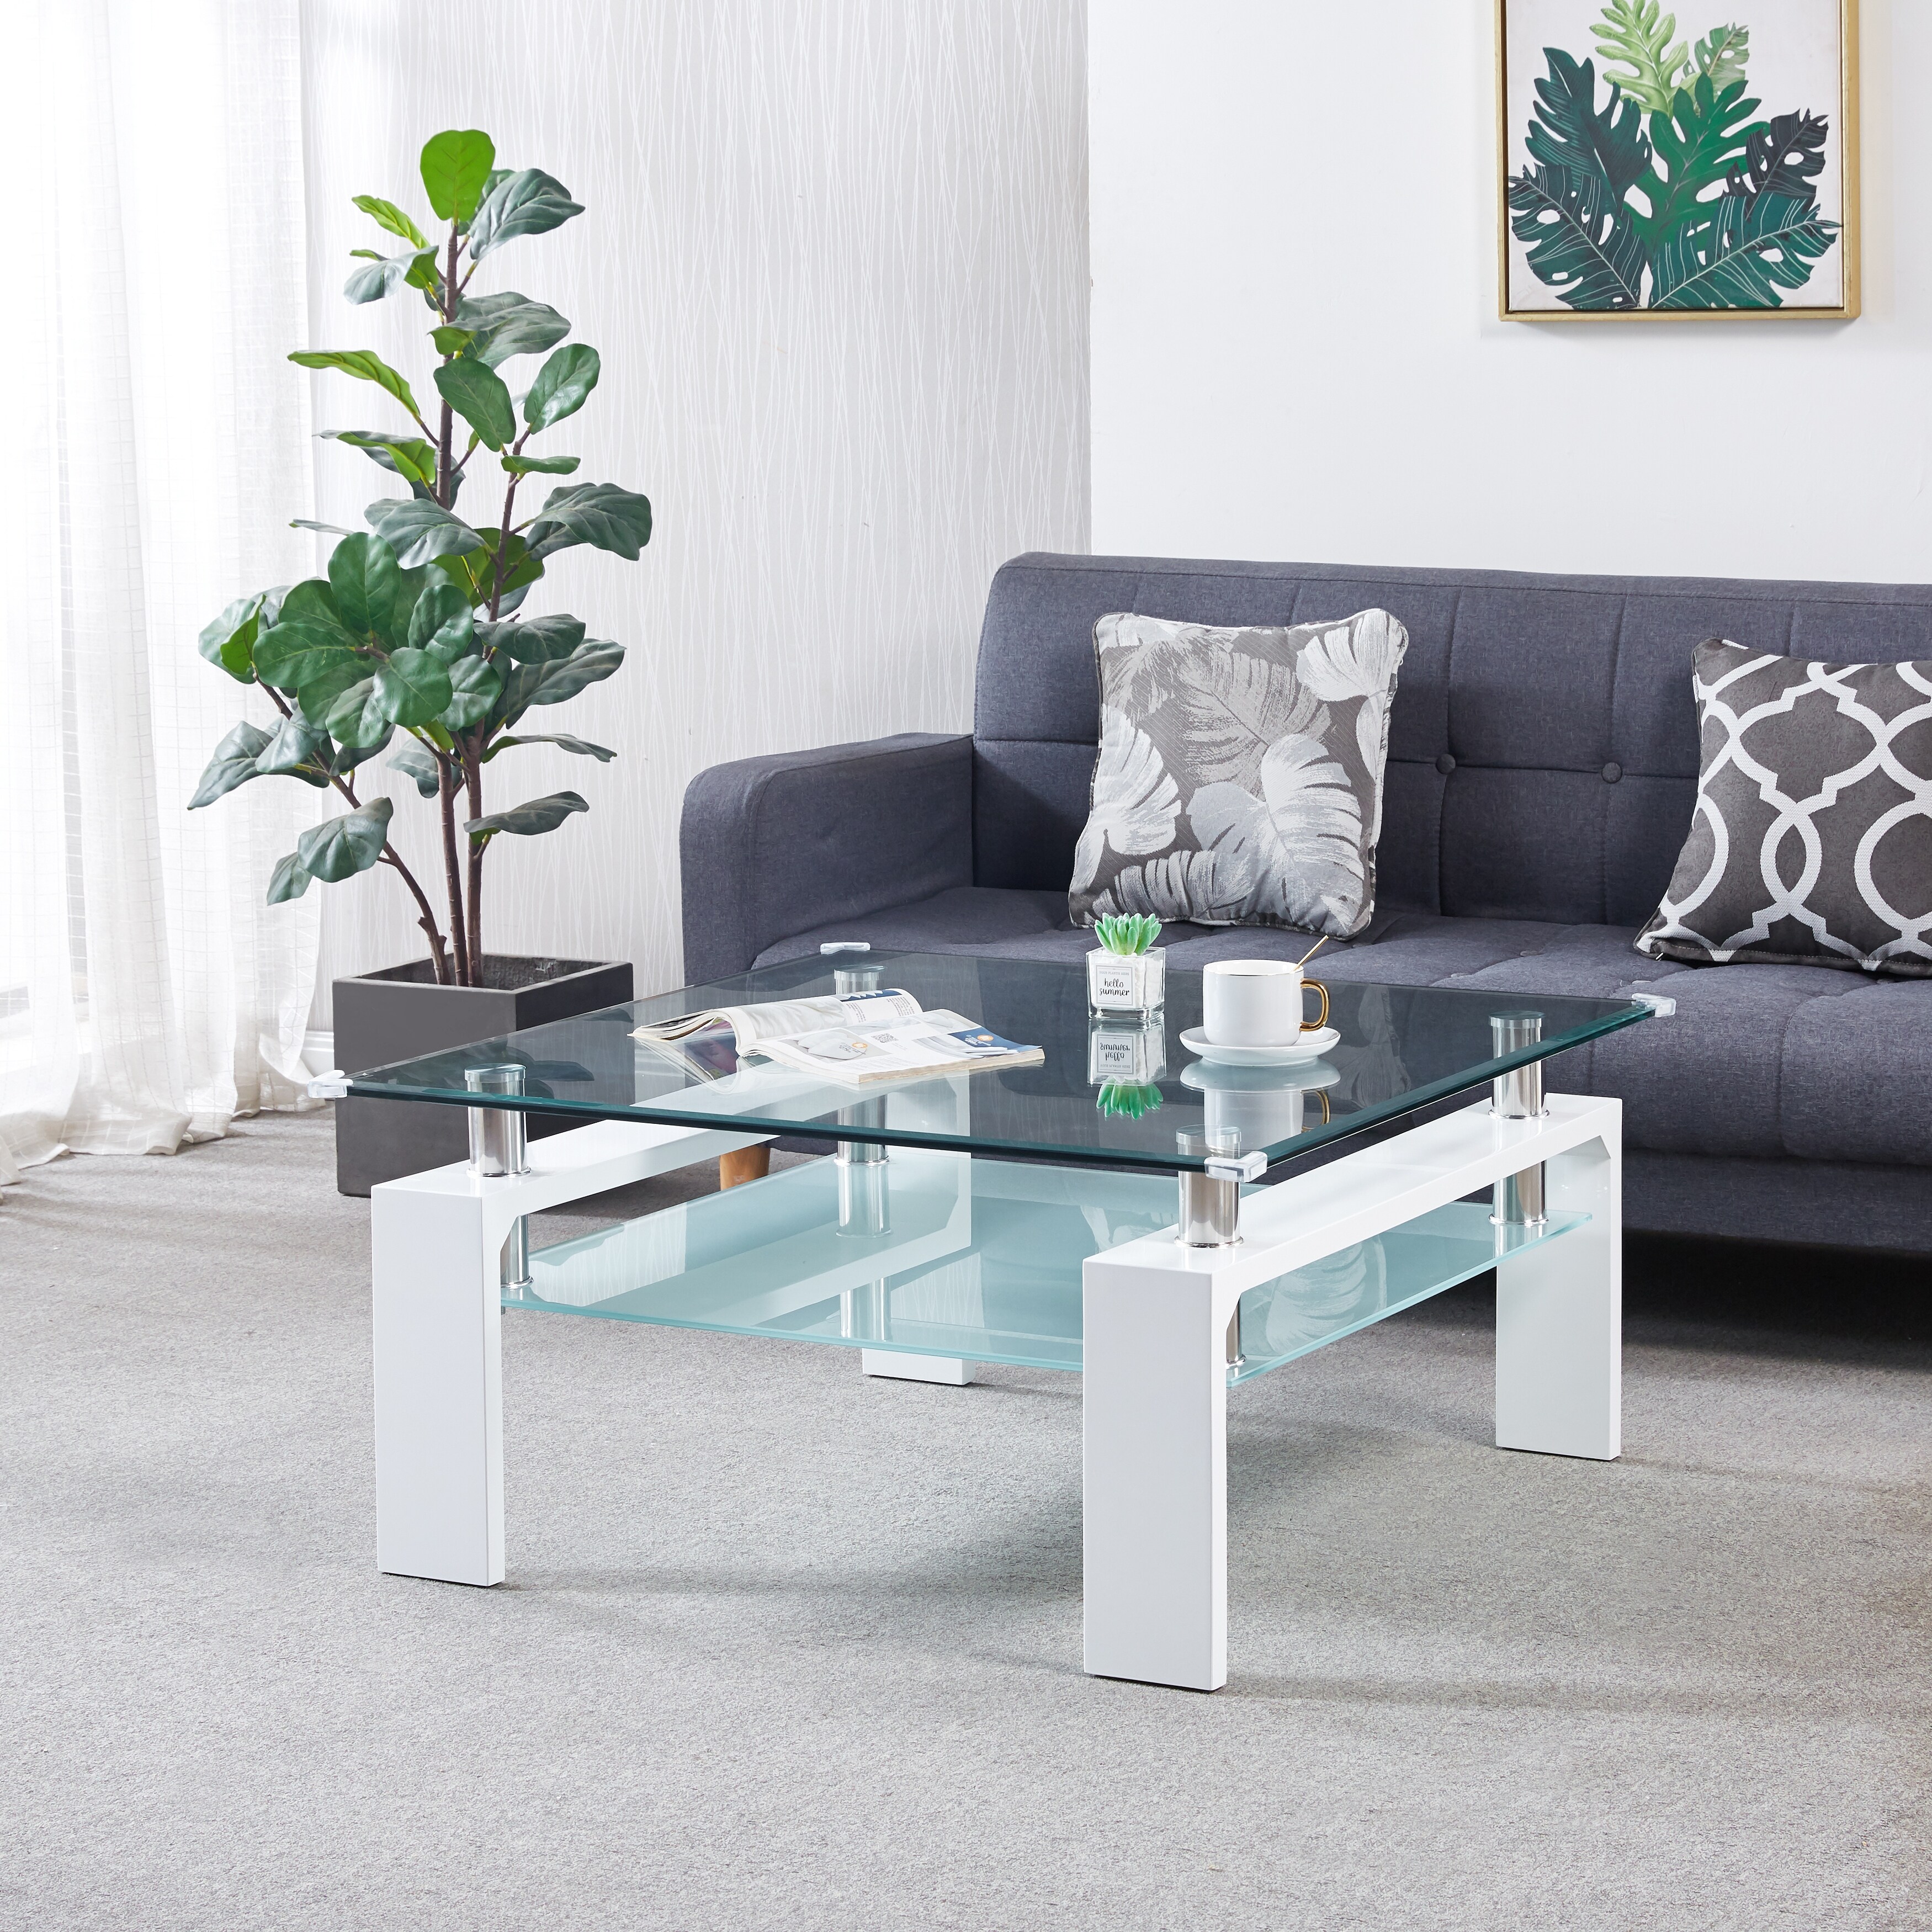 Global Pronex Square Double-Layer Coffee Table with Tempered Glass Top